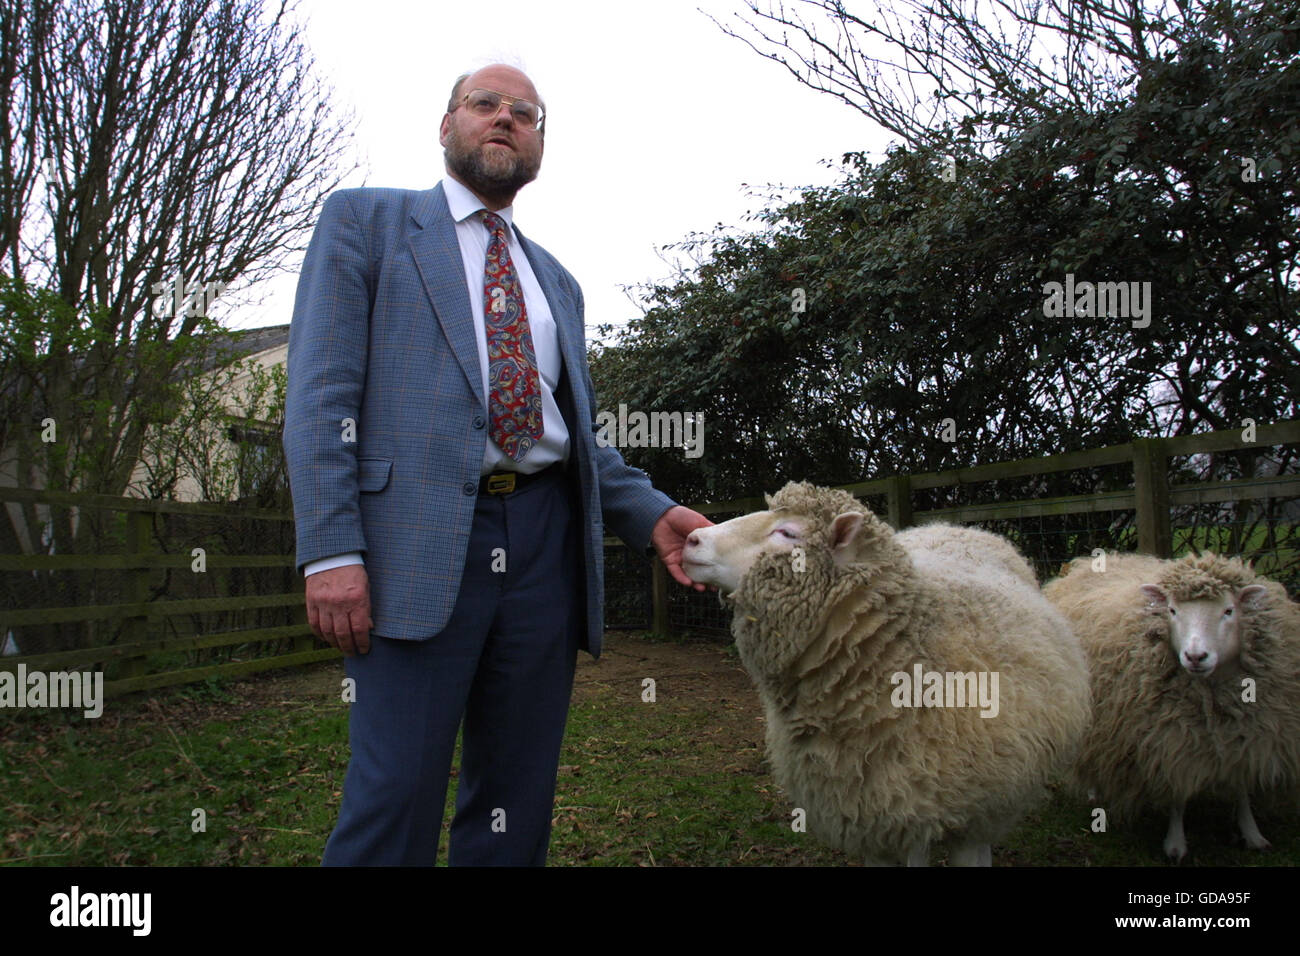 Dr Ian Wilmut, one of the scientists behind the development of Dolly (pictured), the first genetically copied sheep, at Roslin Institute near Edinburgh where they work. Dolly was a female domestic sheep, and the first mammal cloned from an adult somatic cell, using the process of nuclear transfer. The photographs taken by Colin McPherson this day were the last before Dolly was euthanised  on 14 February 2003 because she had a progressive lung disease and severe arthritis. Stock Photo